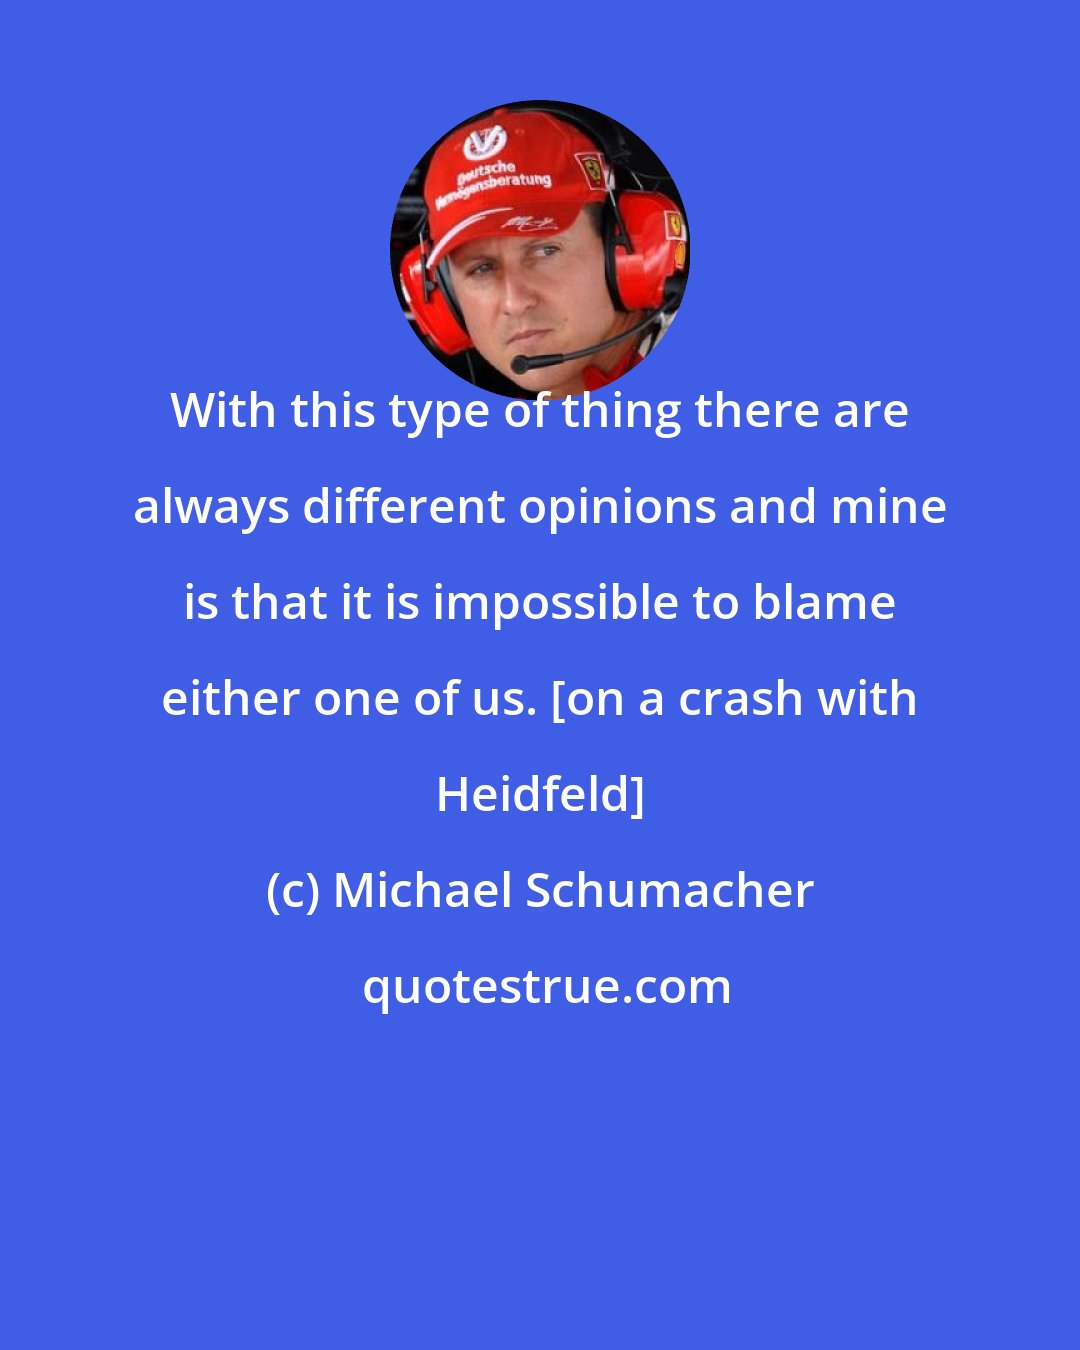 Michael Schumacher: With this type of thing there are always different opinions and mine is that it is impossible to blame either one of us. [on a crash with Heidfeld]